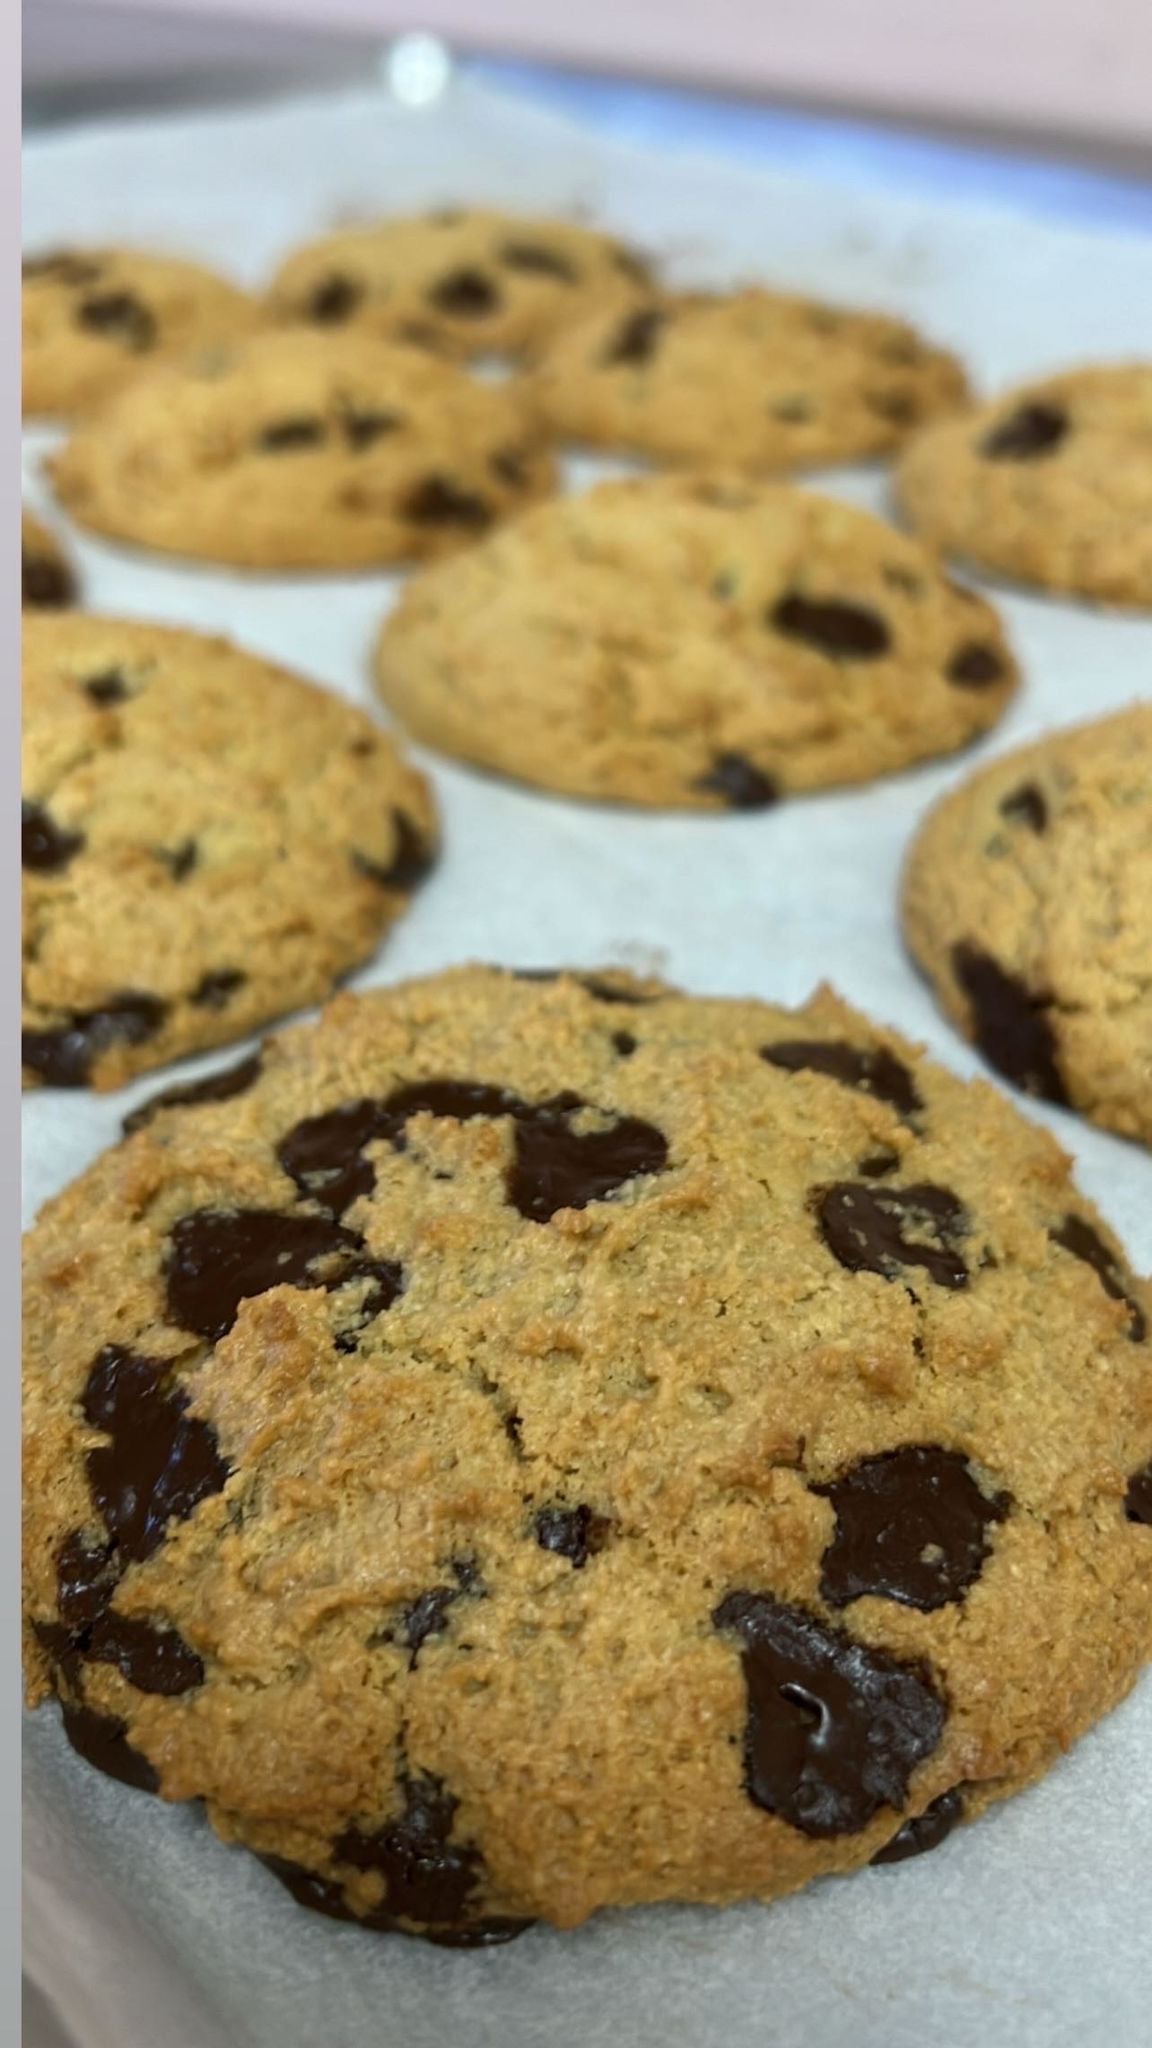 Chocolate chip cookie 2 Pack